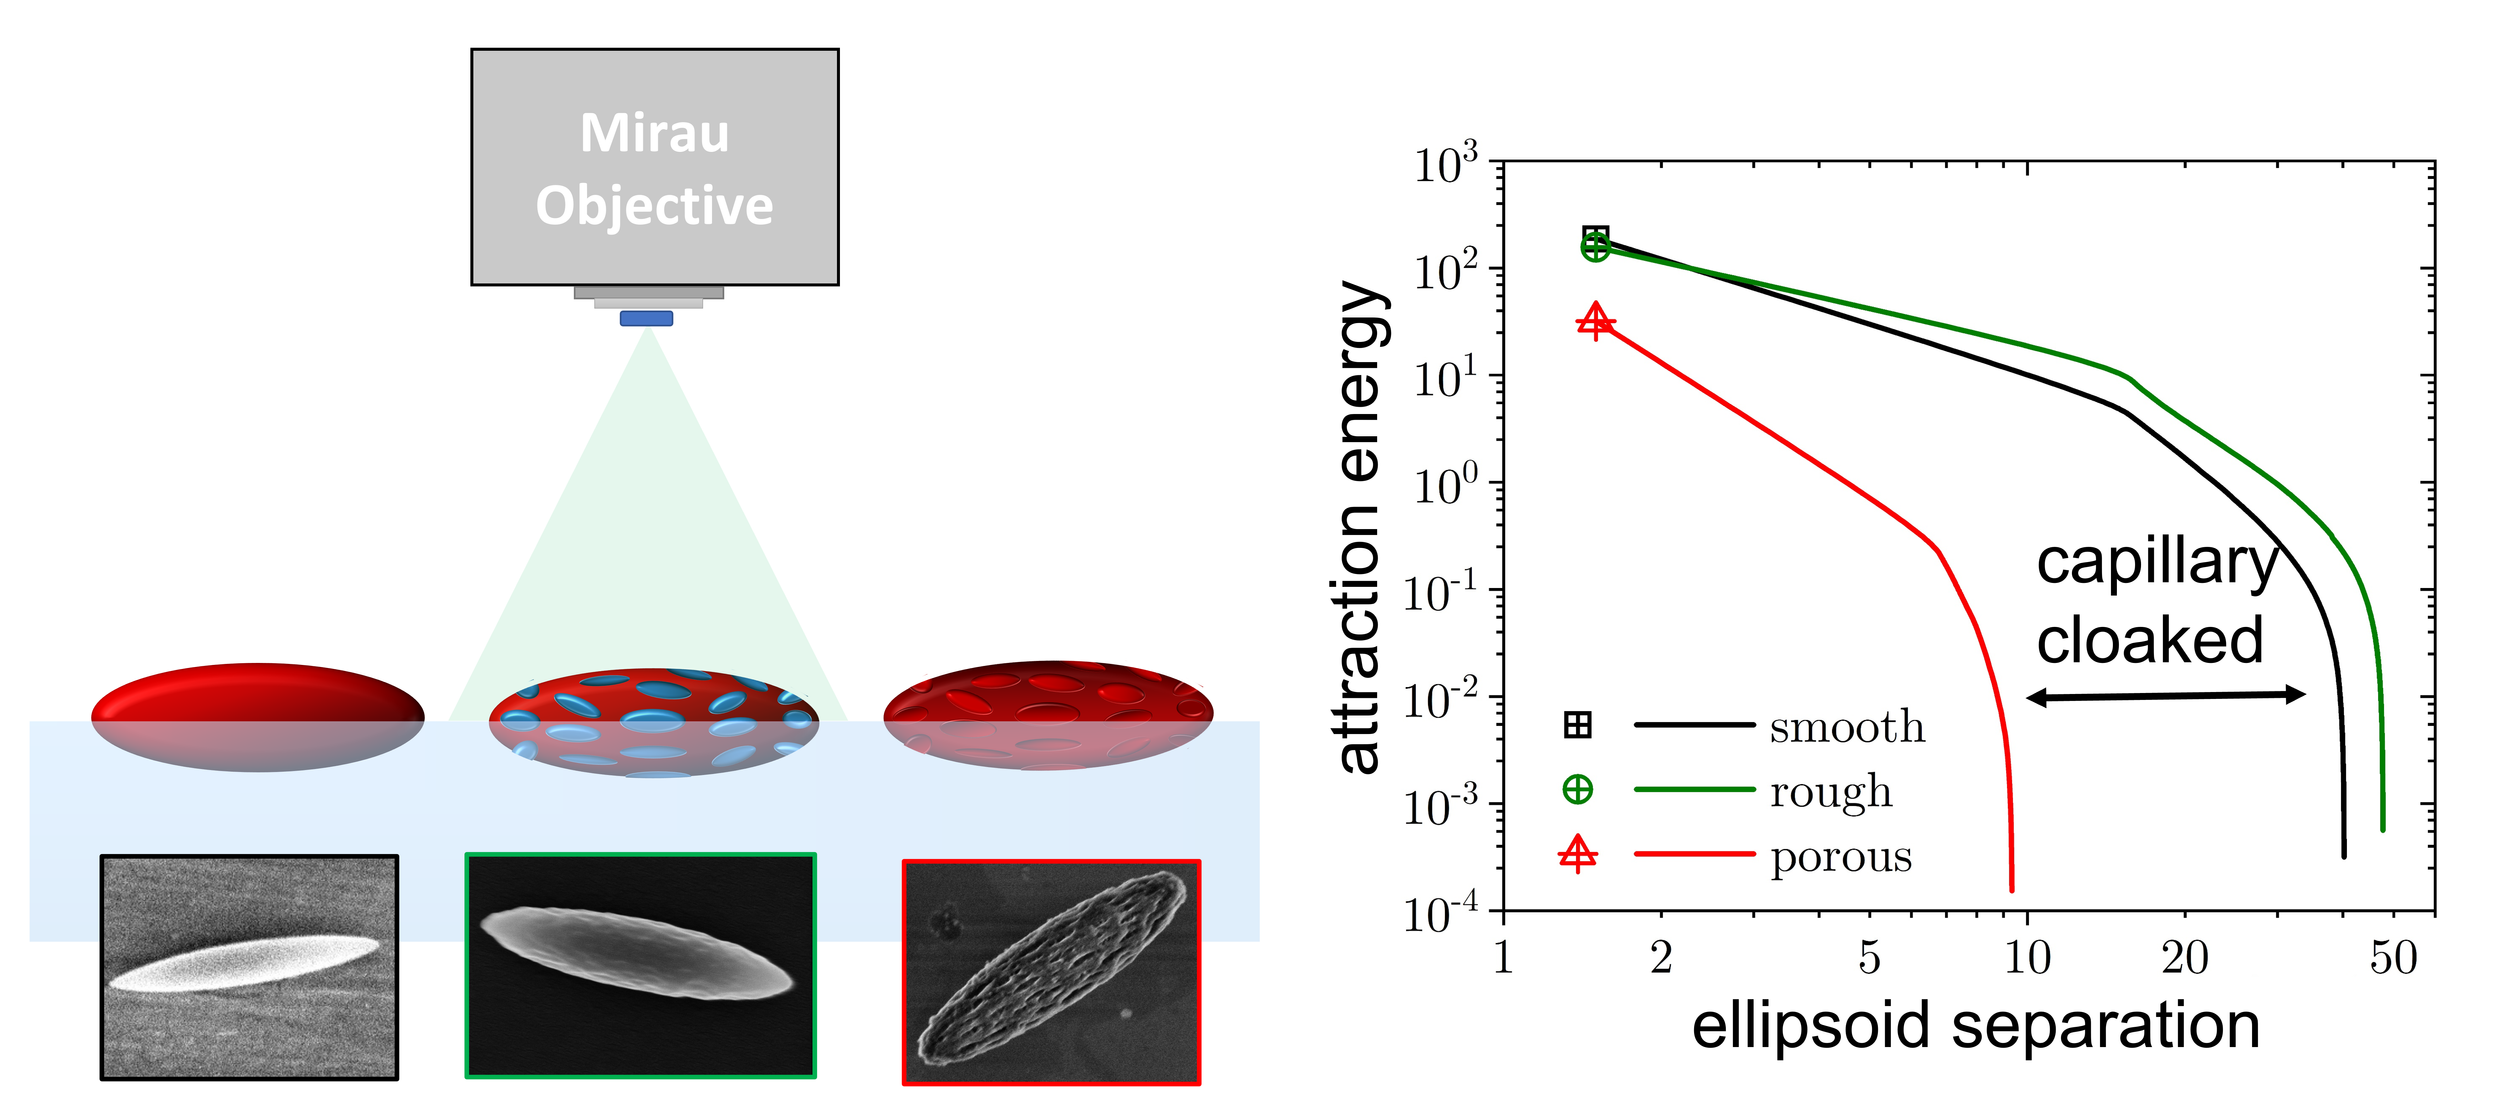 polymer colloids with controlled surface topography